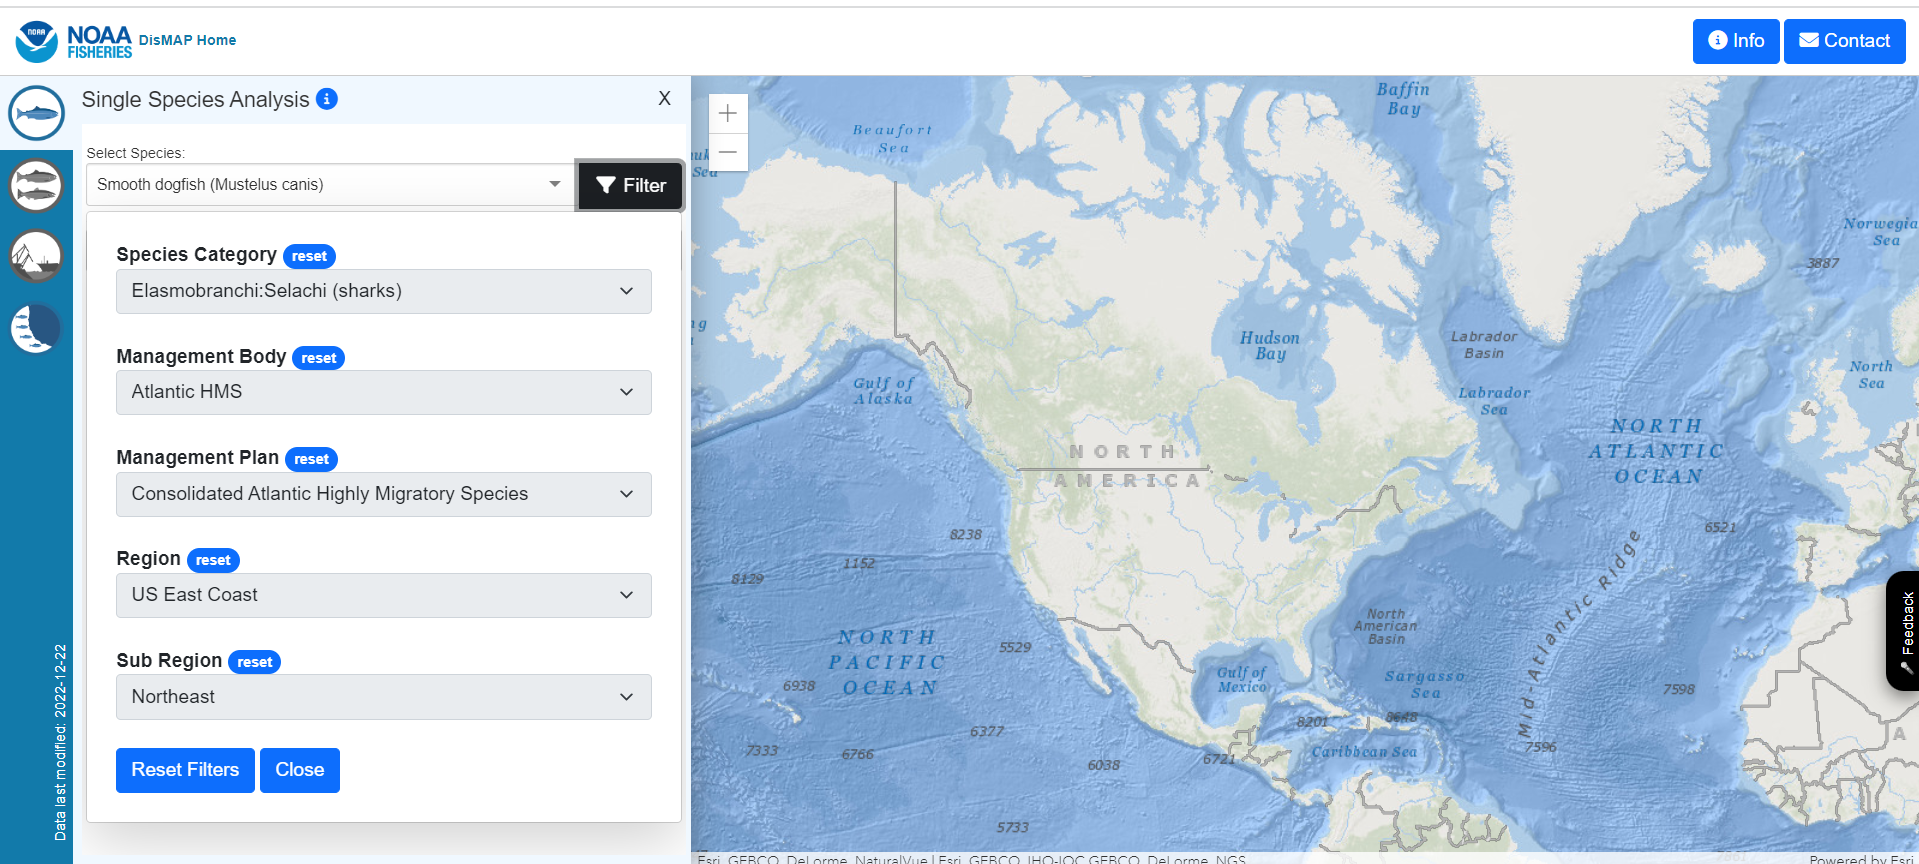 Screenshot of DisMAP interface which displays a large map of North America and surrounding waters with a filtering menu on the left hand side of the screen.